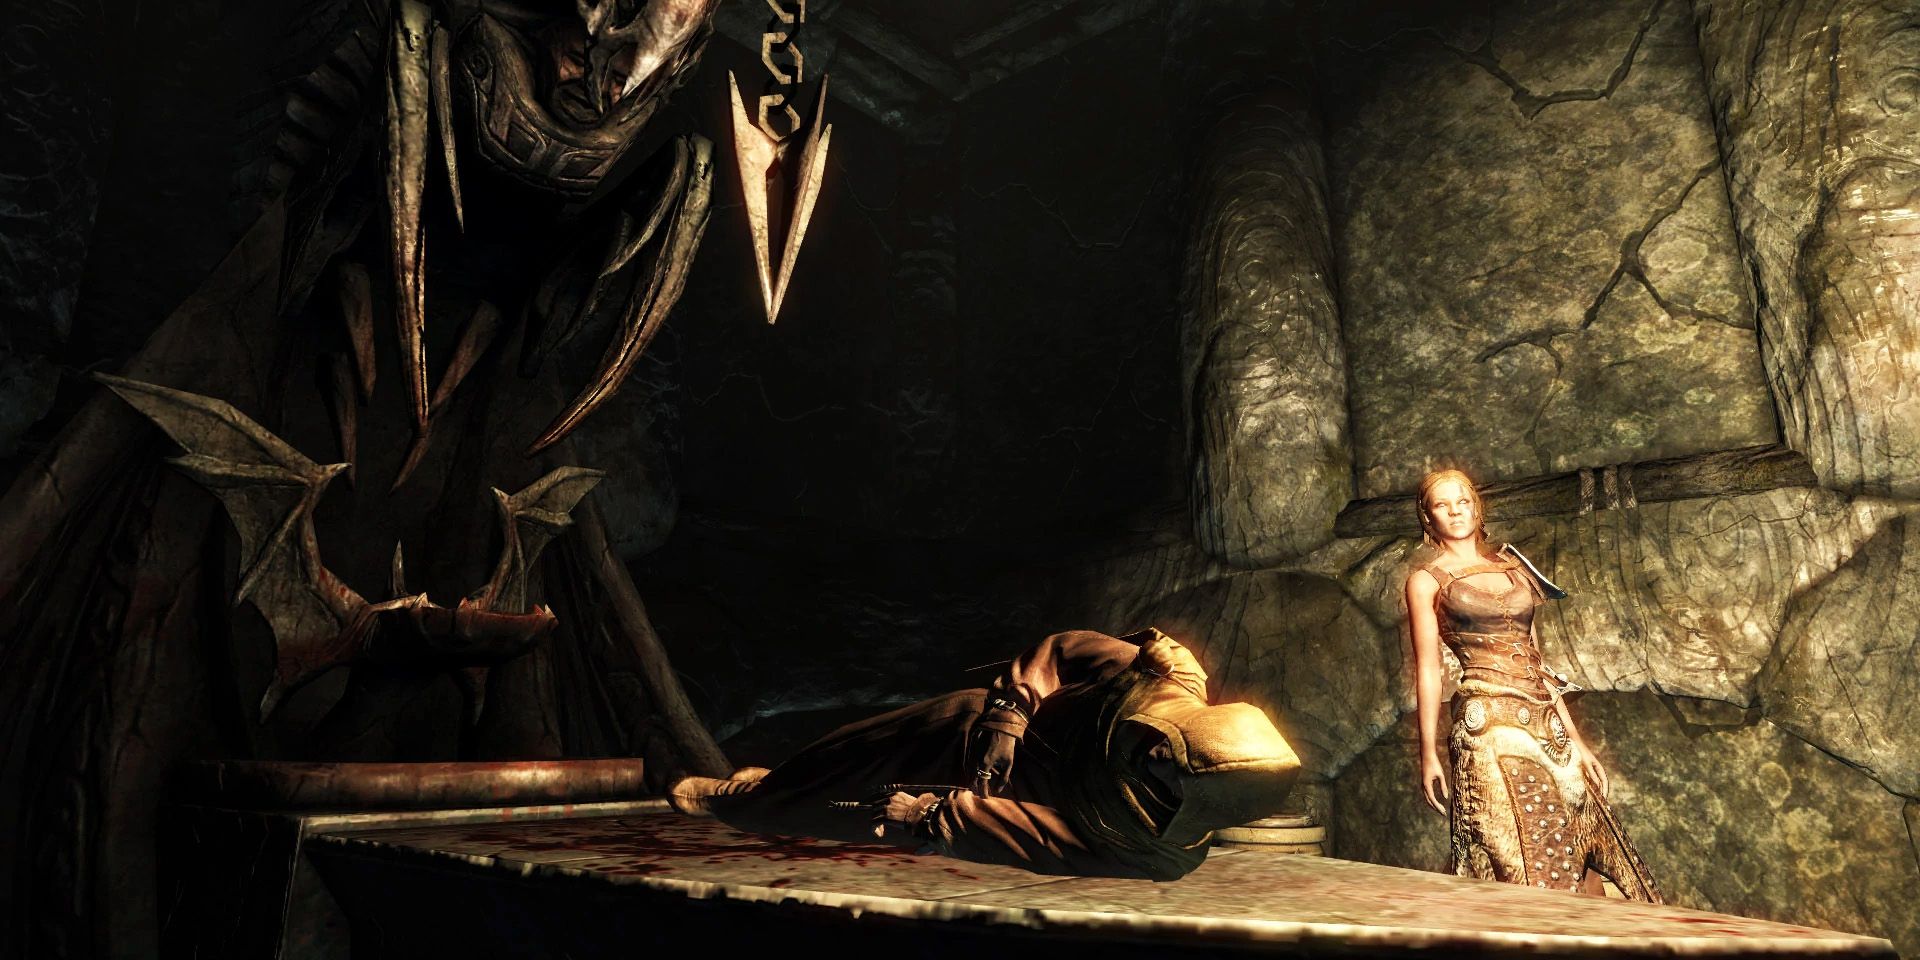 The Dragonborn can feast upon the flesh of the priest Brother Verulus in Skyrim